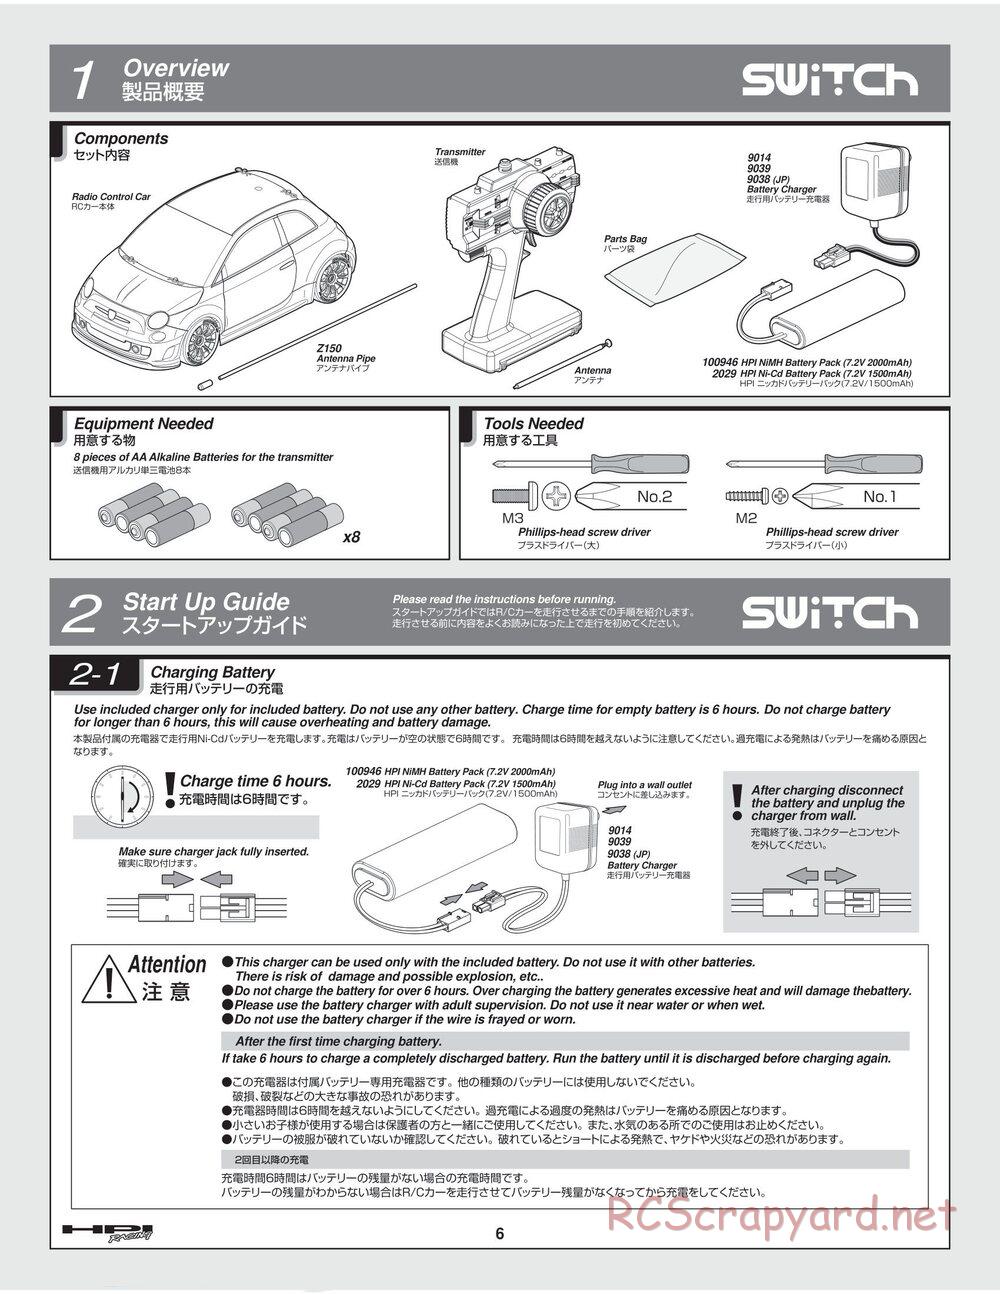 HPI - Switch - Manual - Page 6